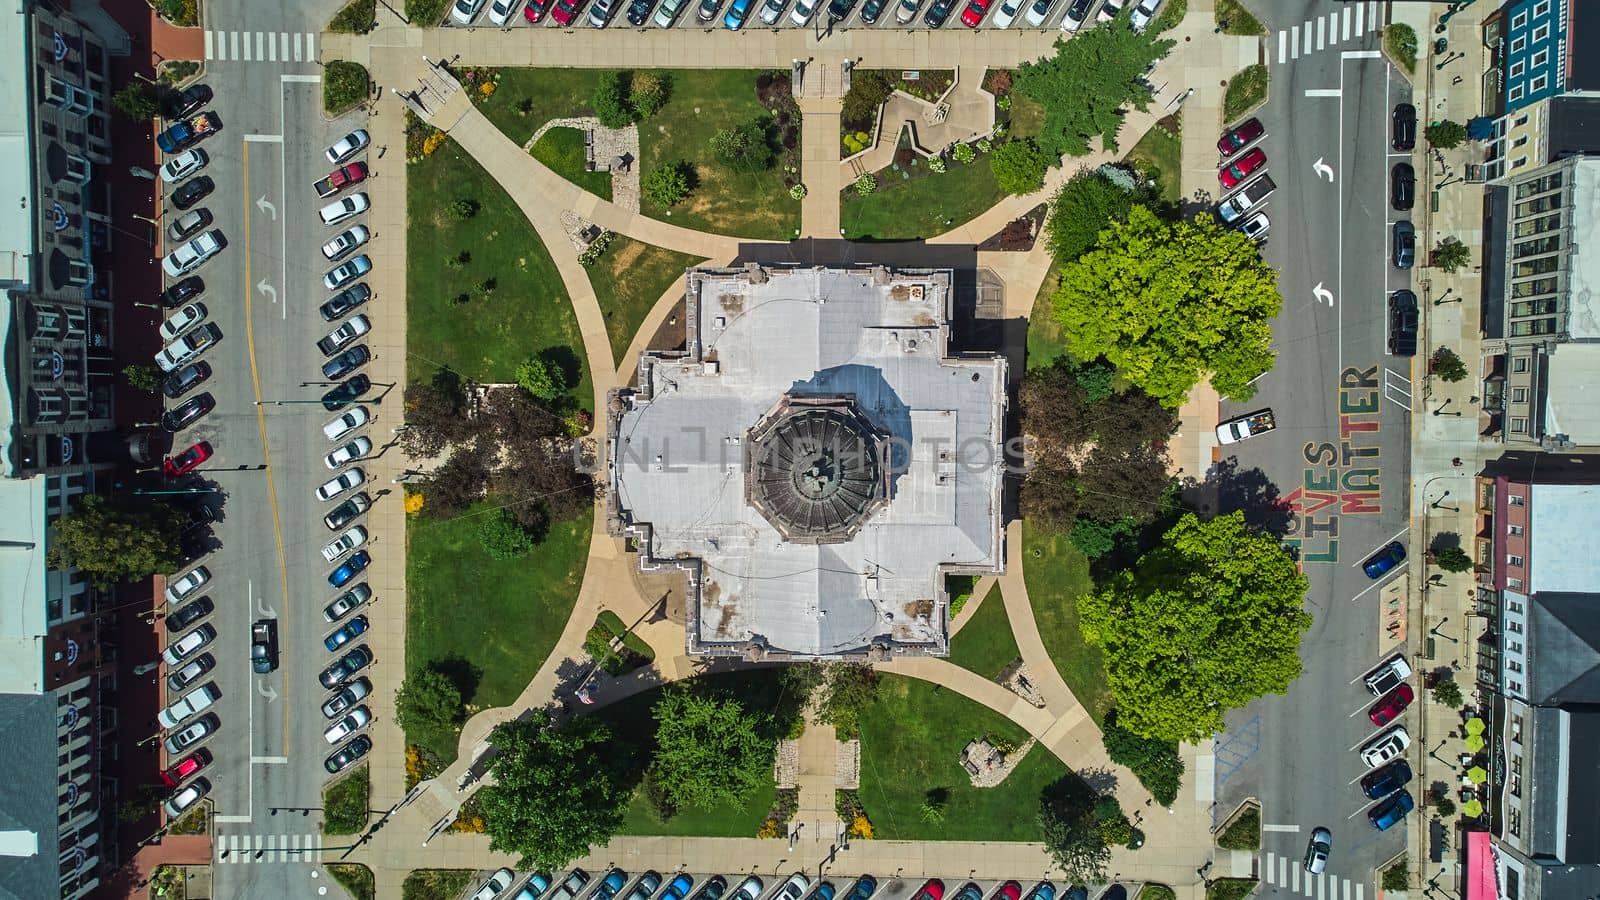 Looking down on Courthouse and The Square in Bloomington Indiana by njproductions